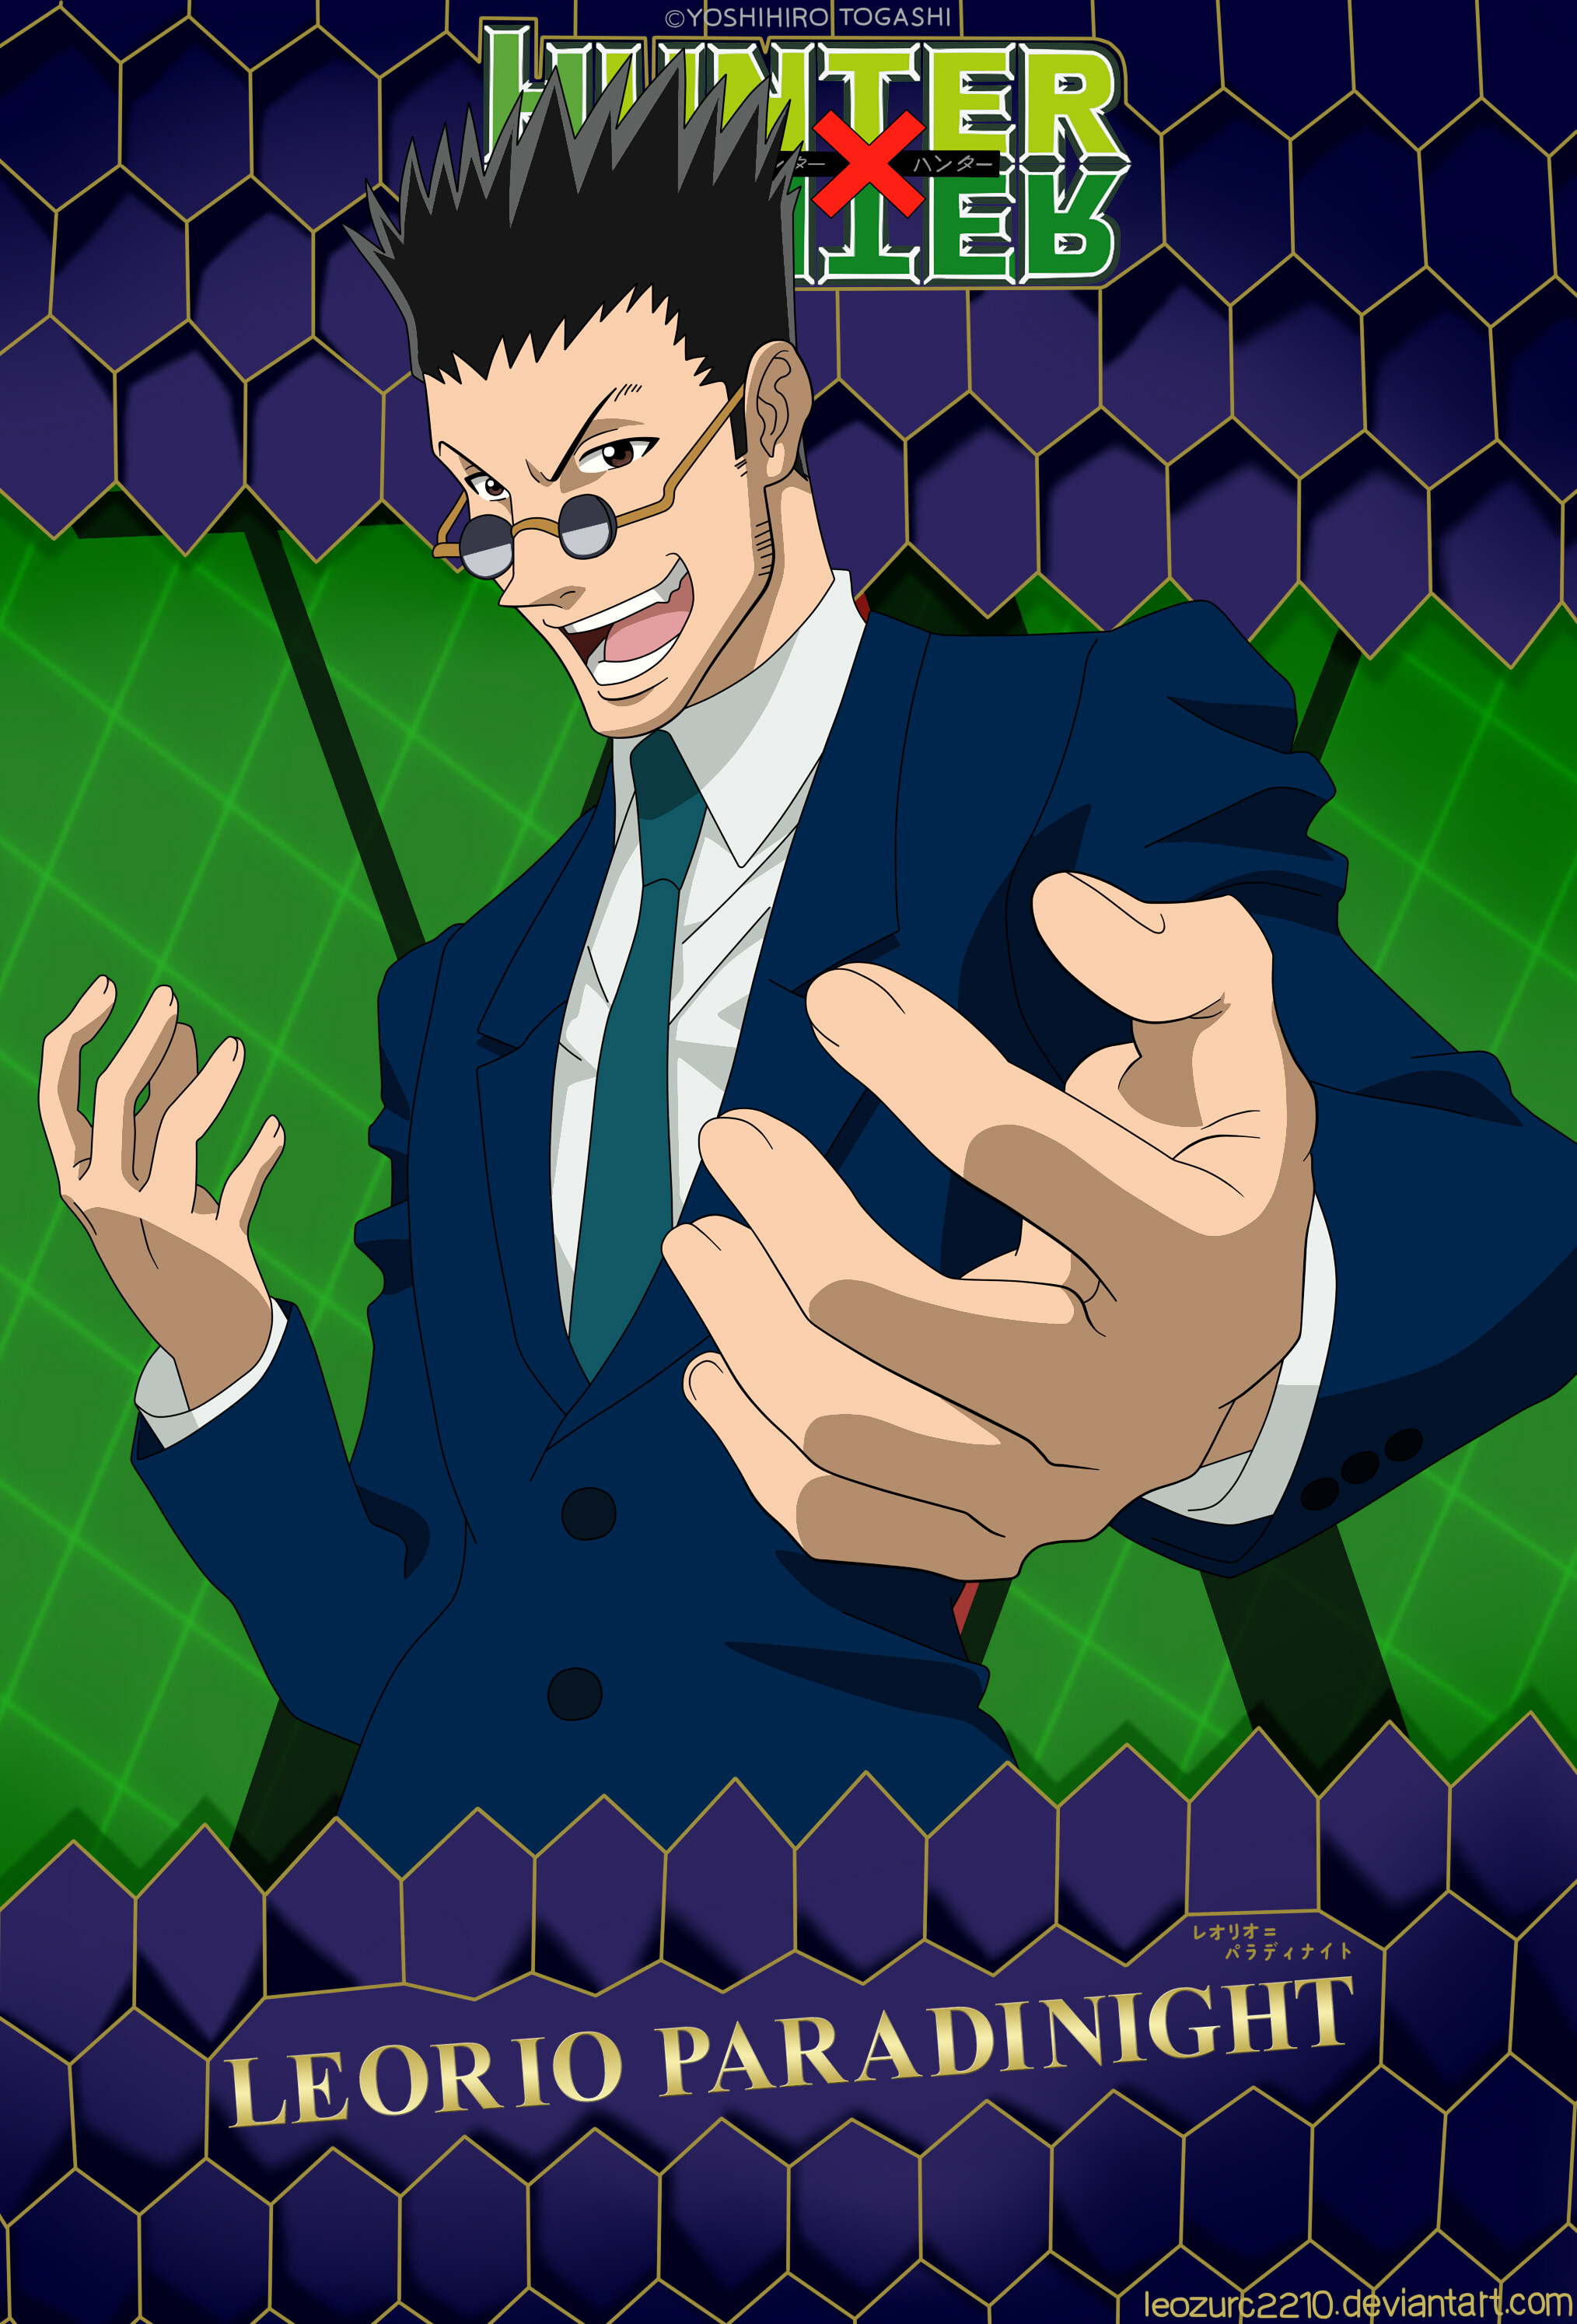 Character Guide for Linked Profiles: Leorio Paradinight feature